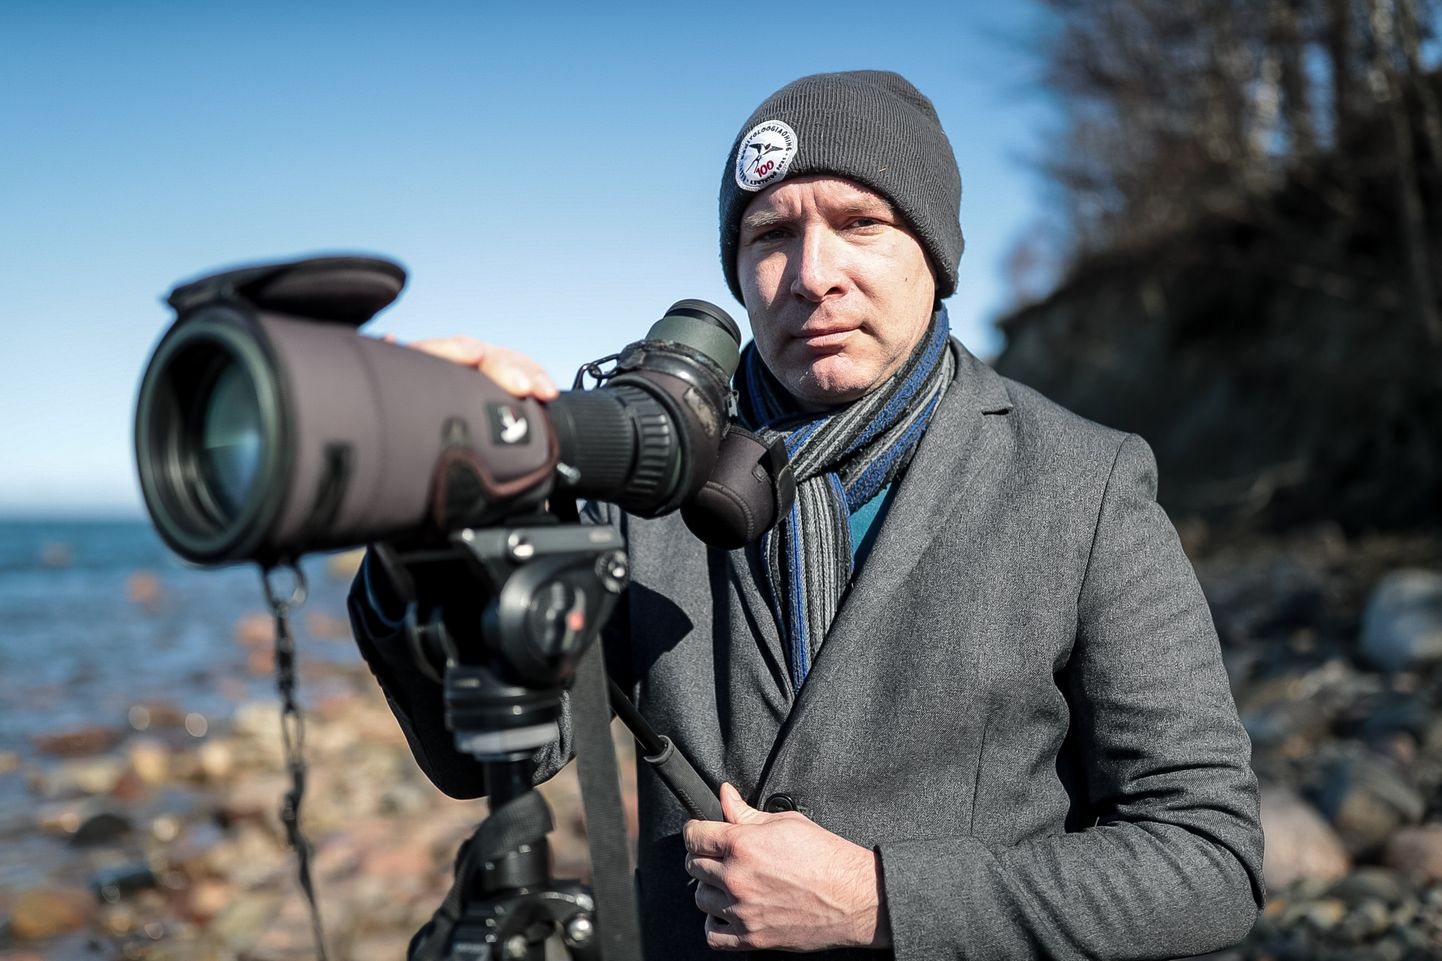 Kaarel Võhandu, a bird scientist and head of the Estonian Ornithological Society, confirms that he is not against the gas terminal in principle, but still considers it necessary to assess its environmental impact.